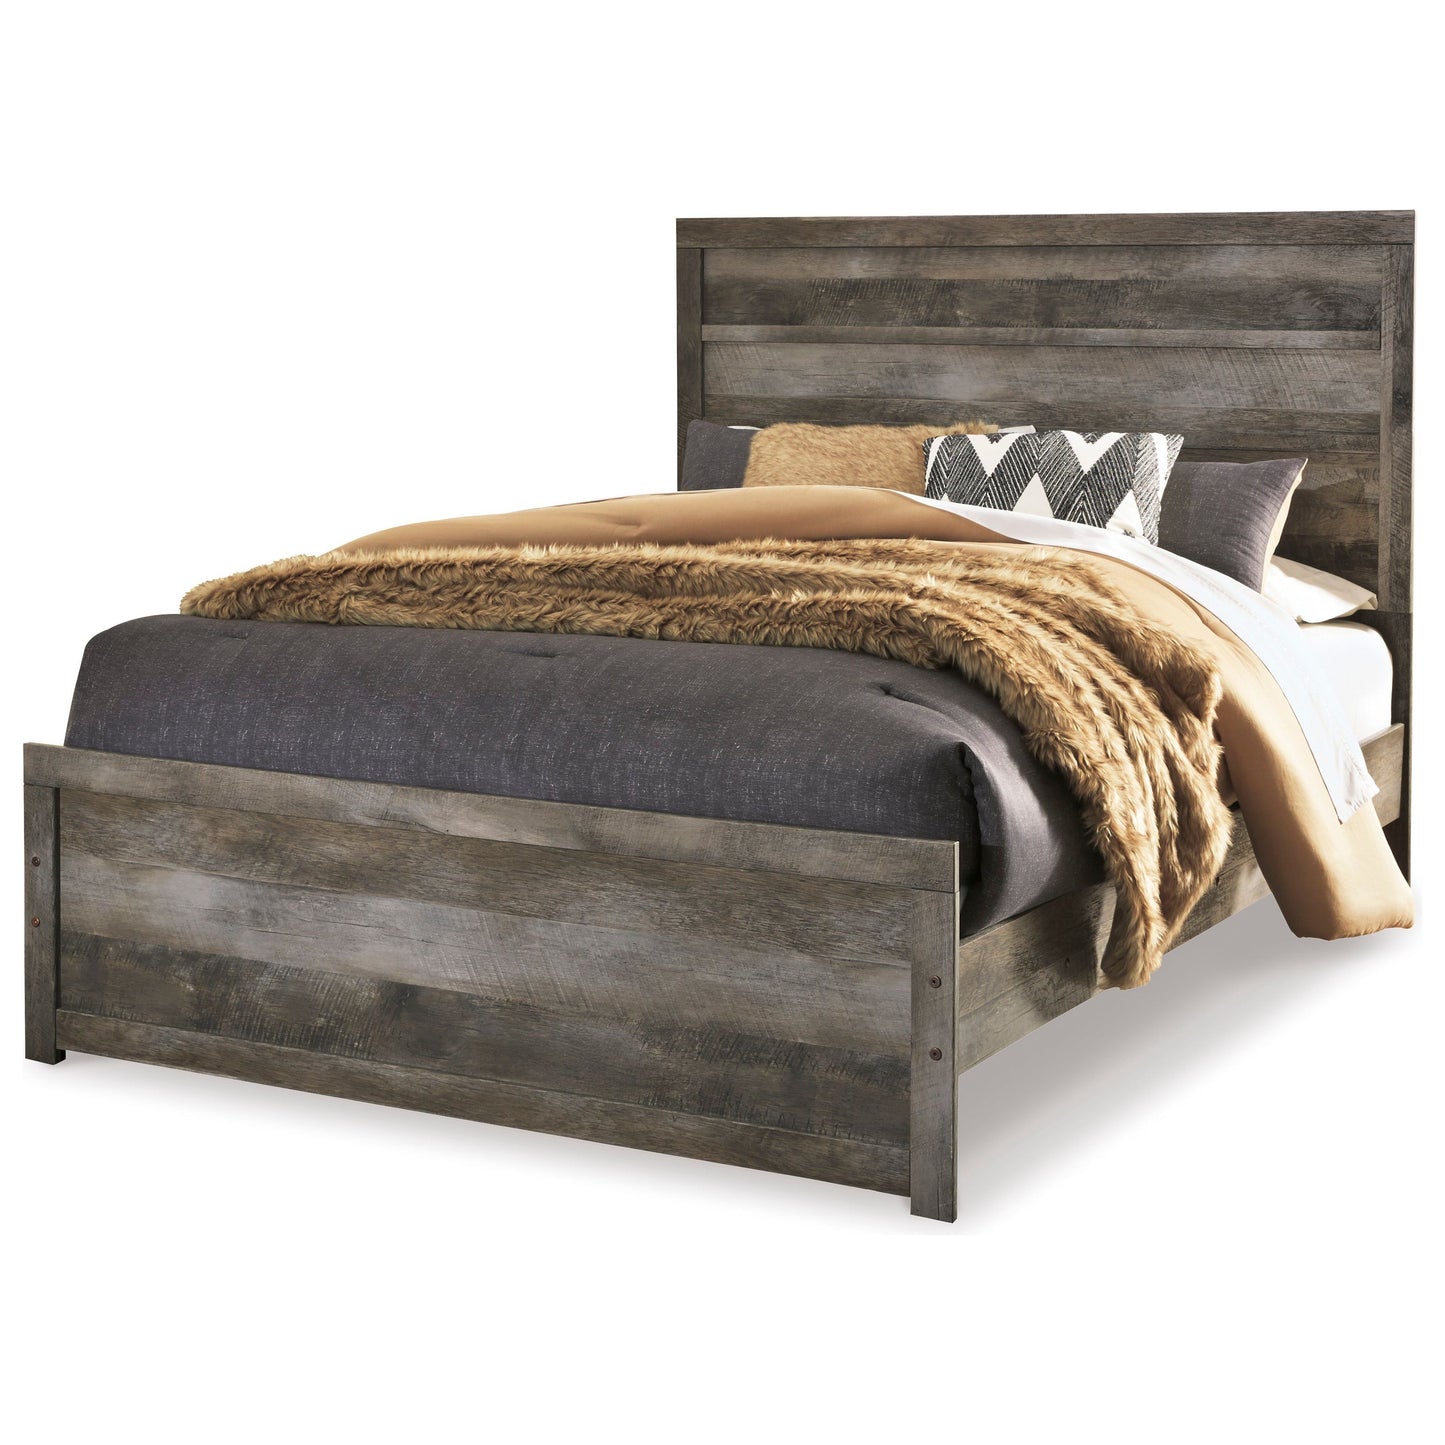 WYNNLOW PANEL BED - GRAY